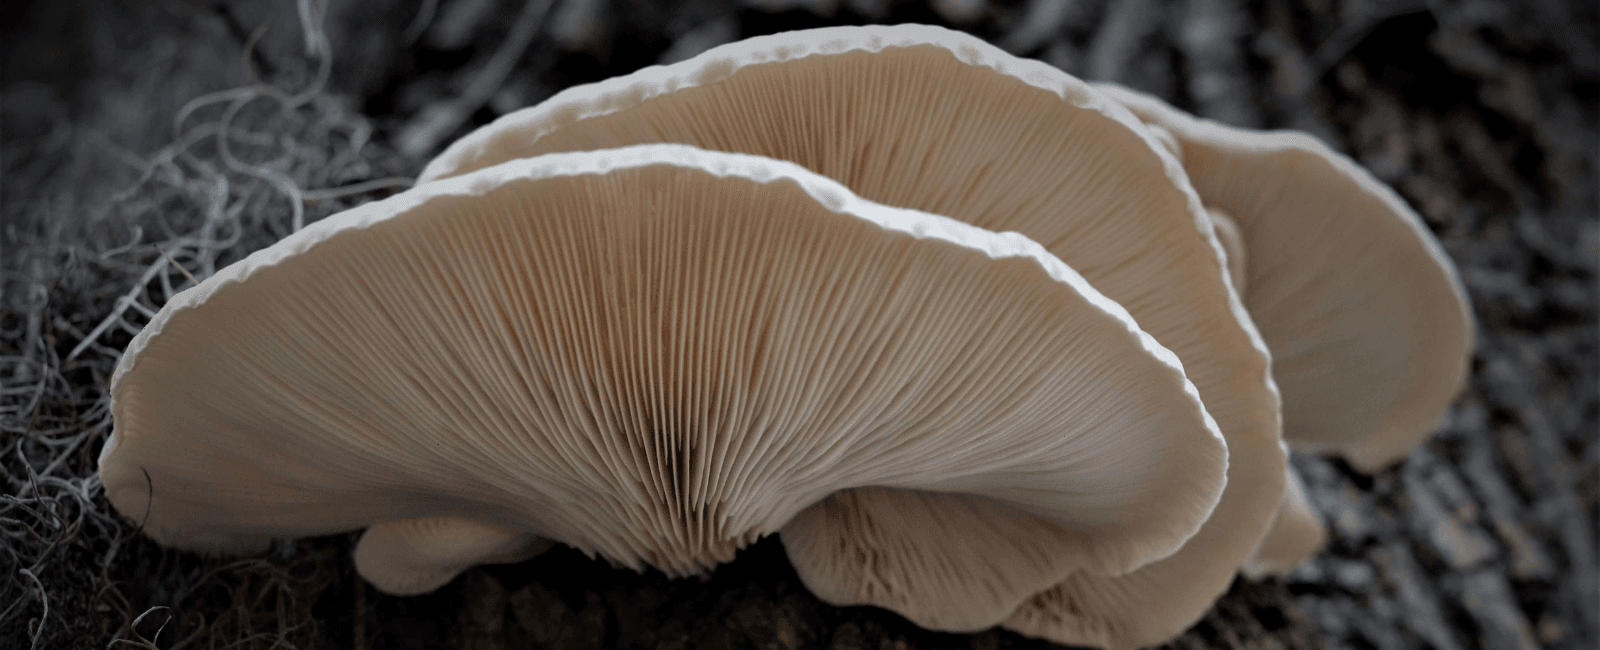 Carnivorous Oyster Mushrooms May Hold the Key to Natural Pesticides